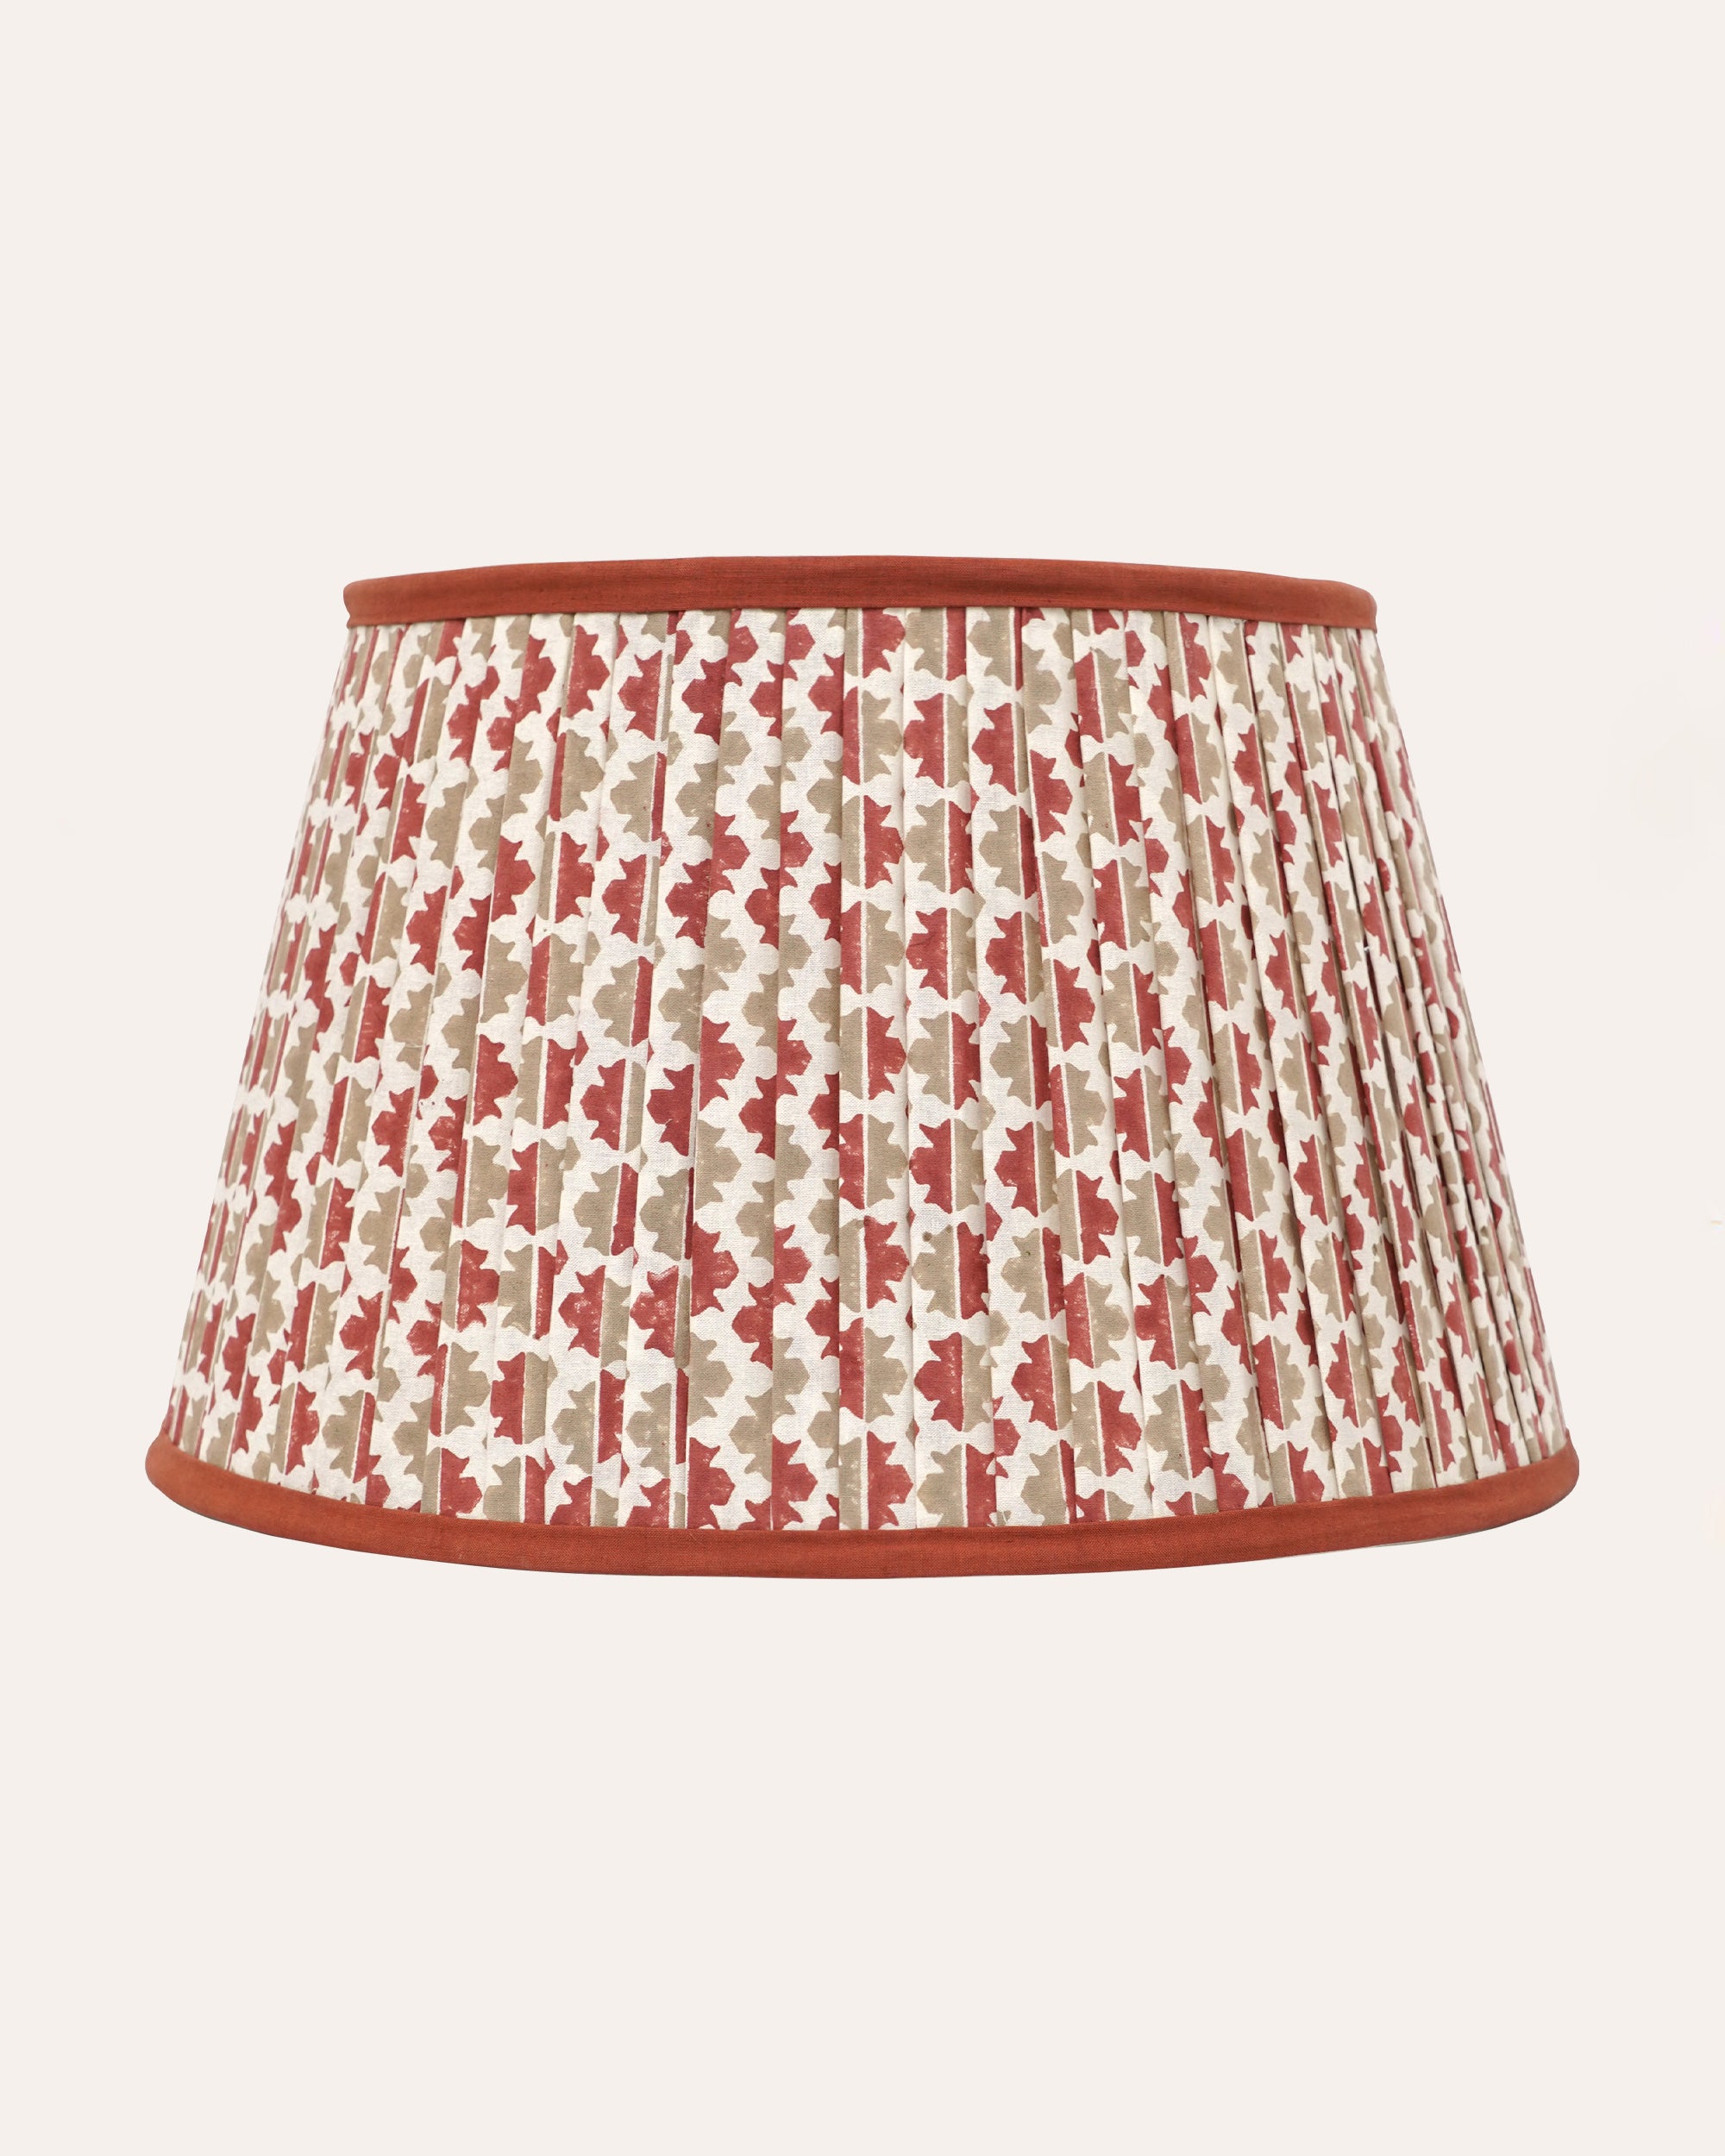 Sintra Pleated Lampshade - Red